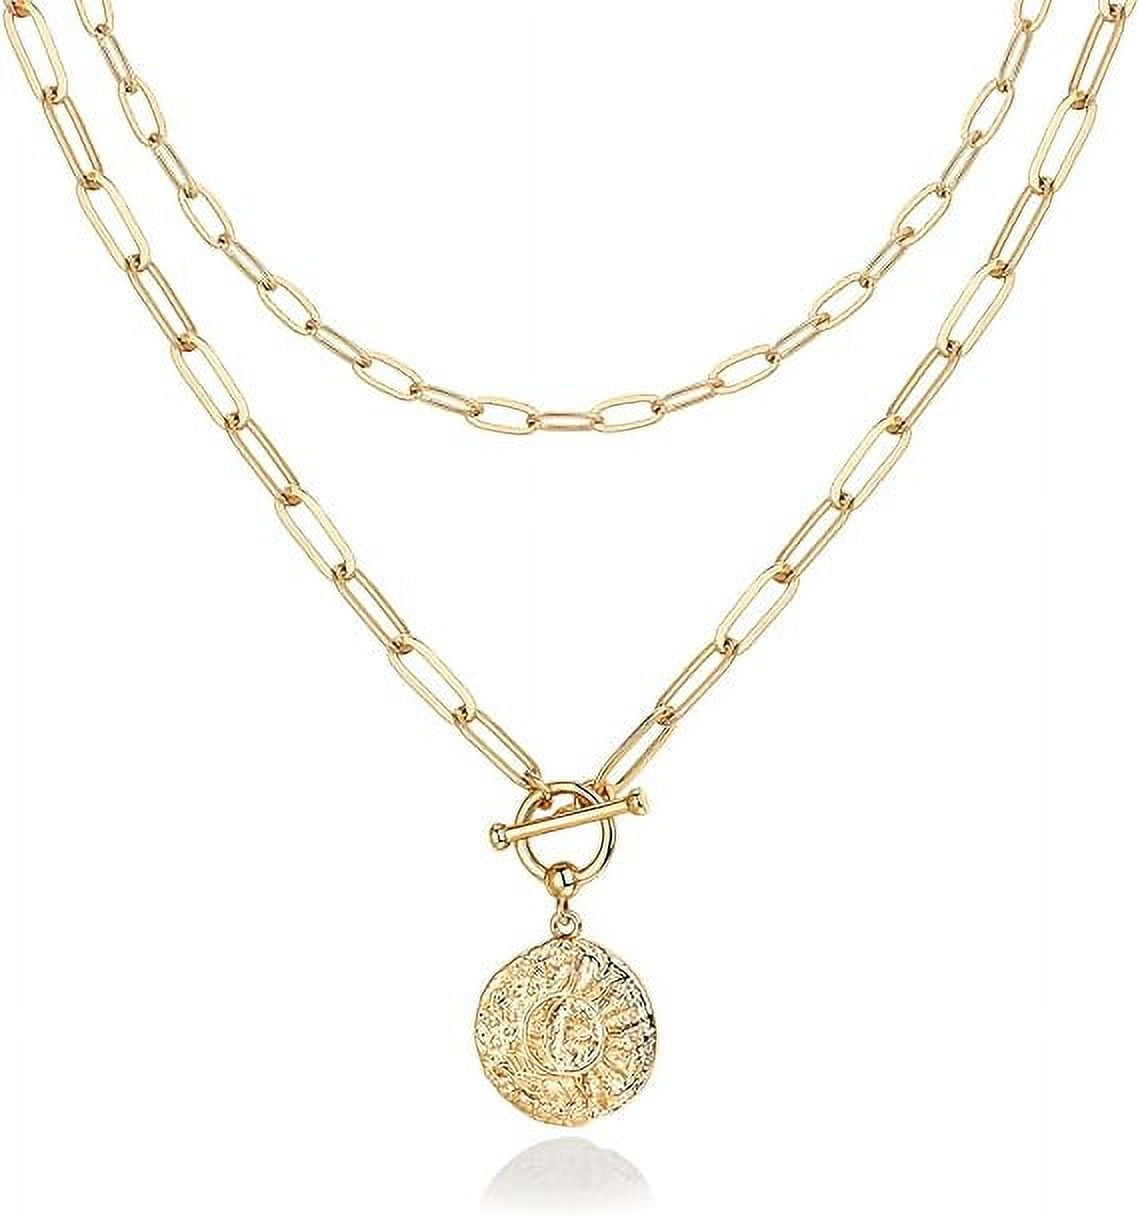 PAVOI 14K Gold Plated Layered Sun and Lock Pendant Necklace | Layering ...